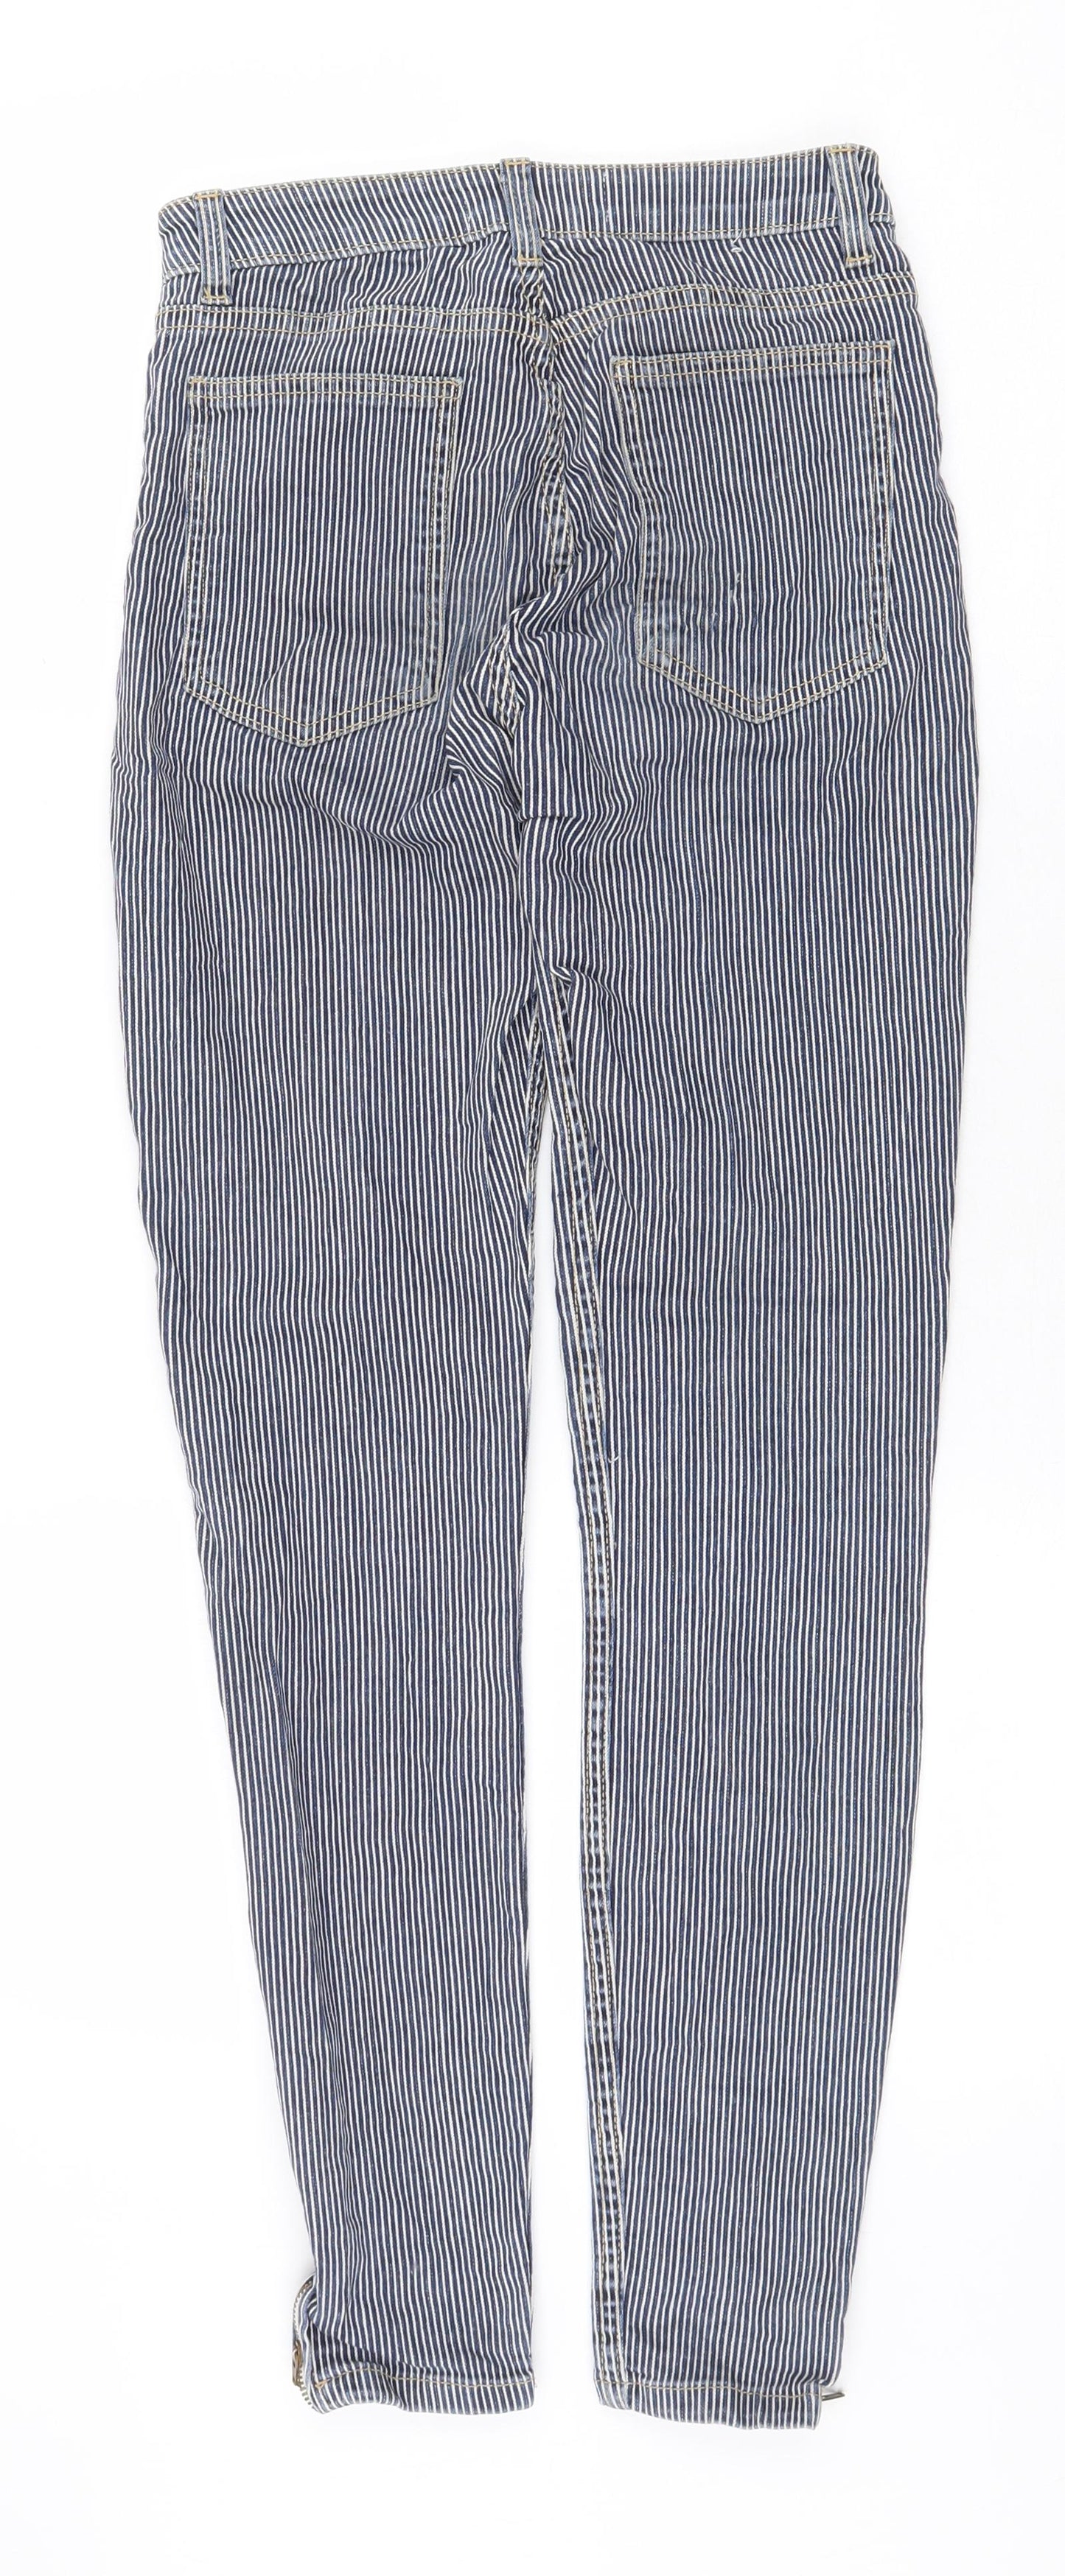 American Apparel Womens Blue Striped Cotton Straight Jeans Size 26 in Regular Zip